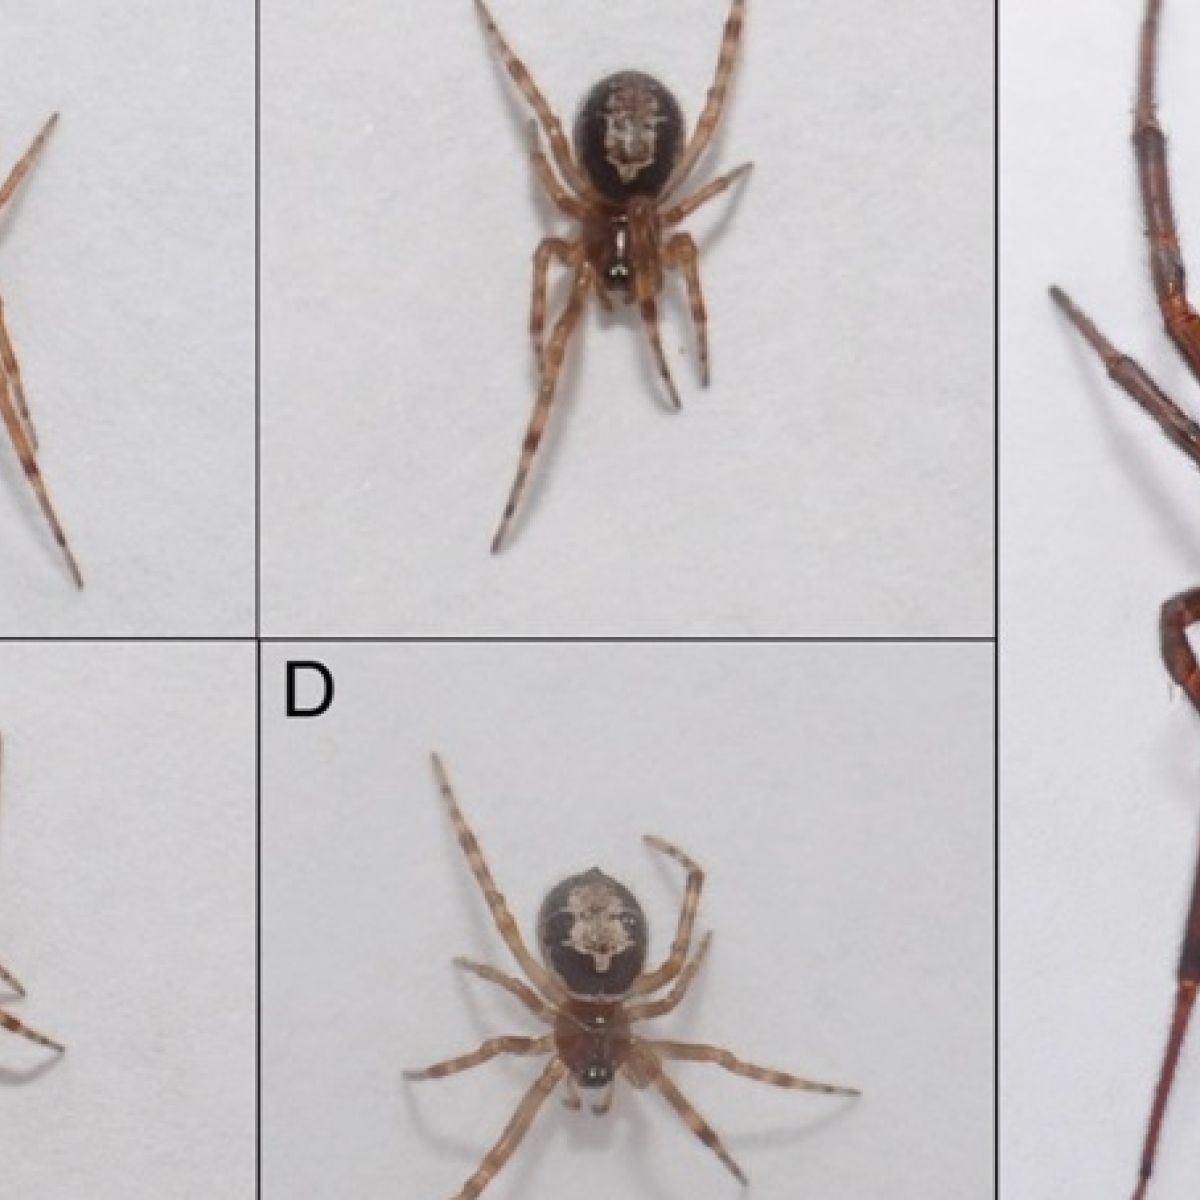 Ireland Under Attack From Spiders That Are Wiping Out Native Species